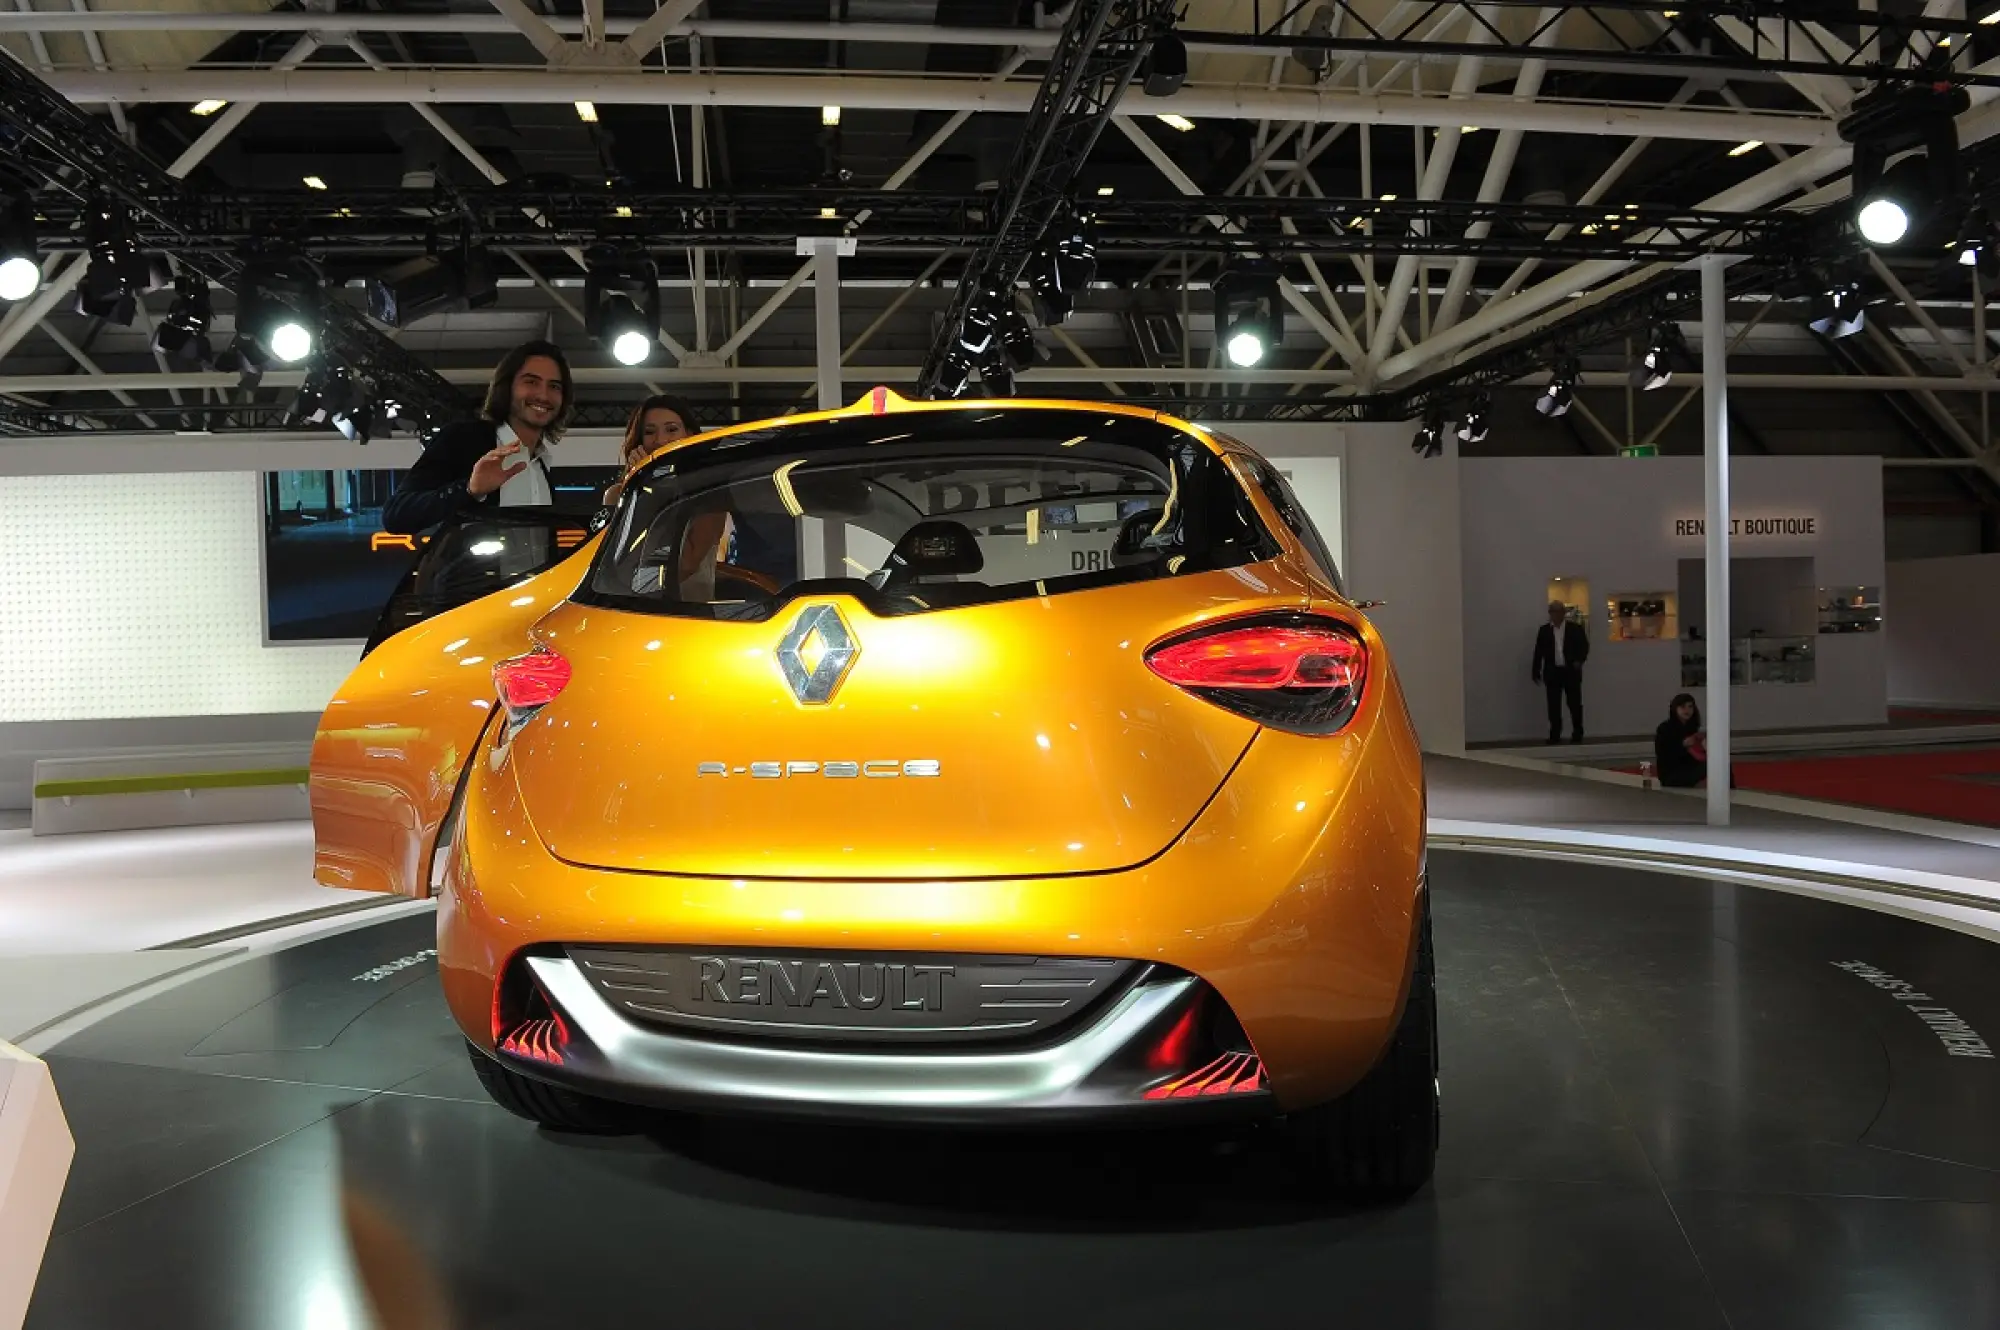 Renault R-Space Concept Motor Show 2011 - 3